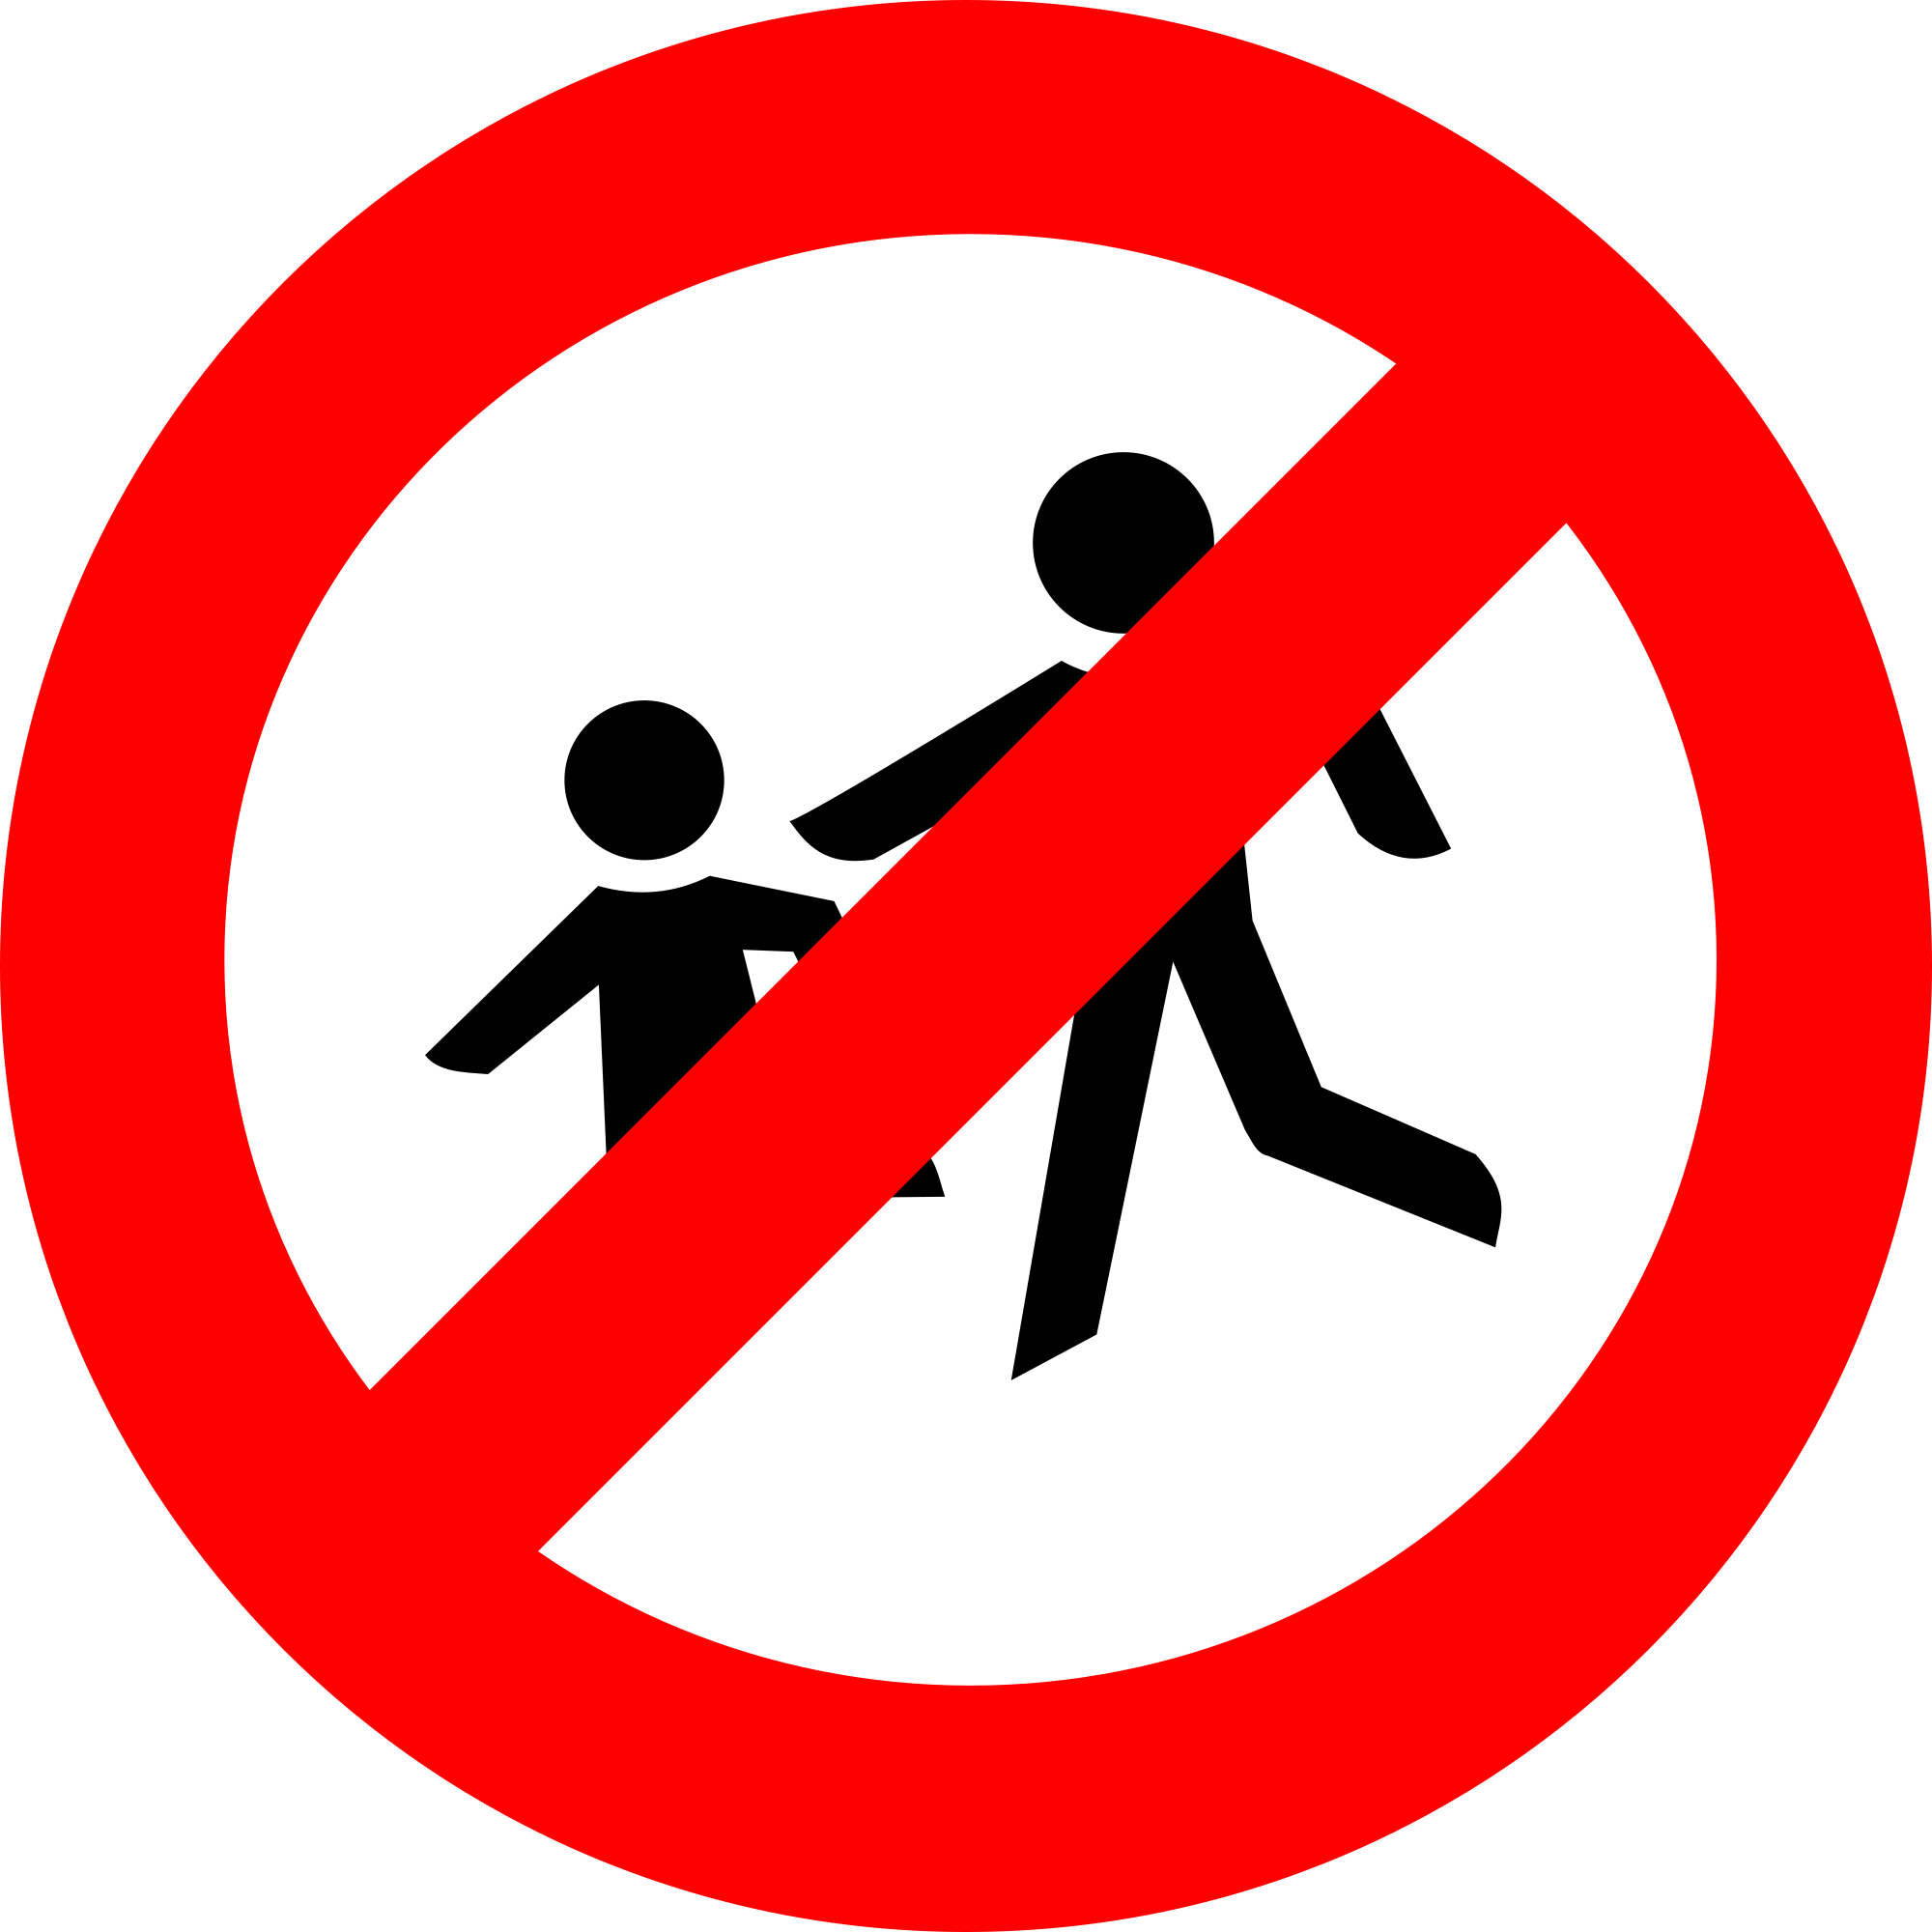 As Feds Tell Colleges To Support Parenting Students - No Pedestrians Road Sign (2000x2000)